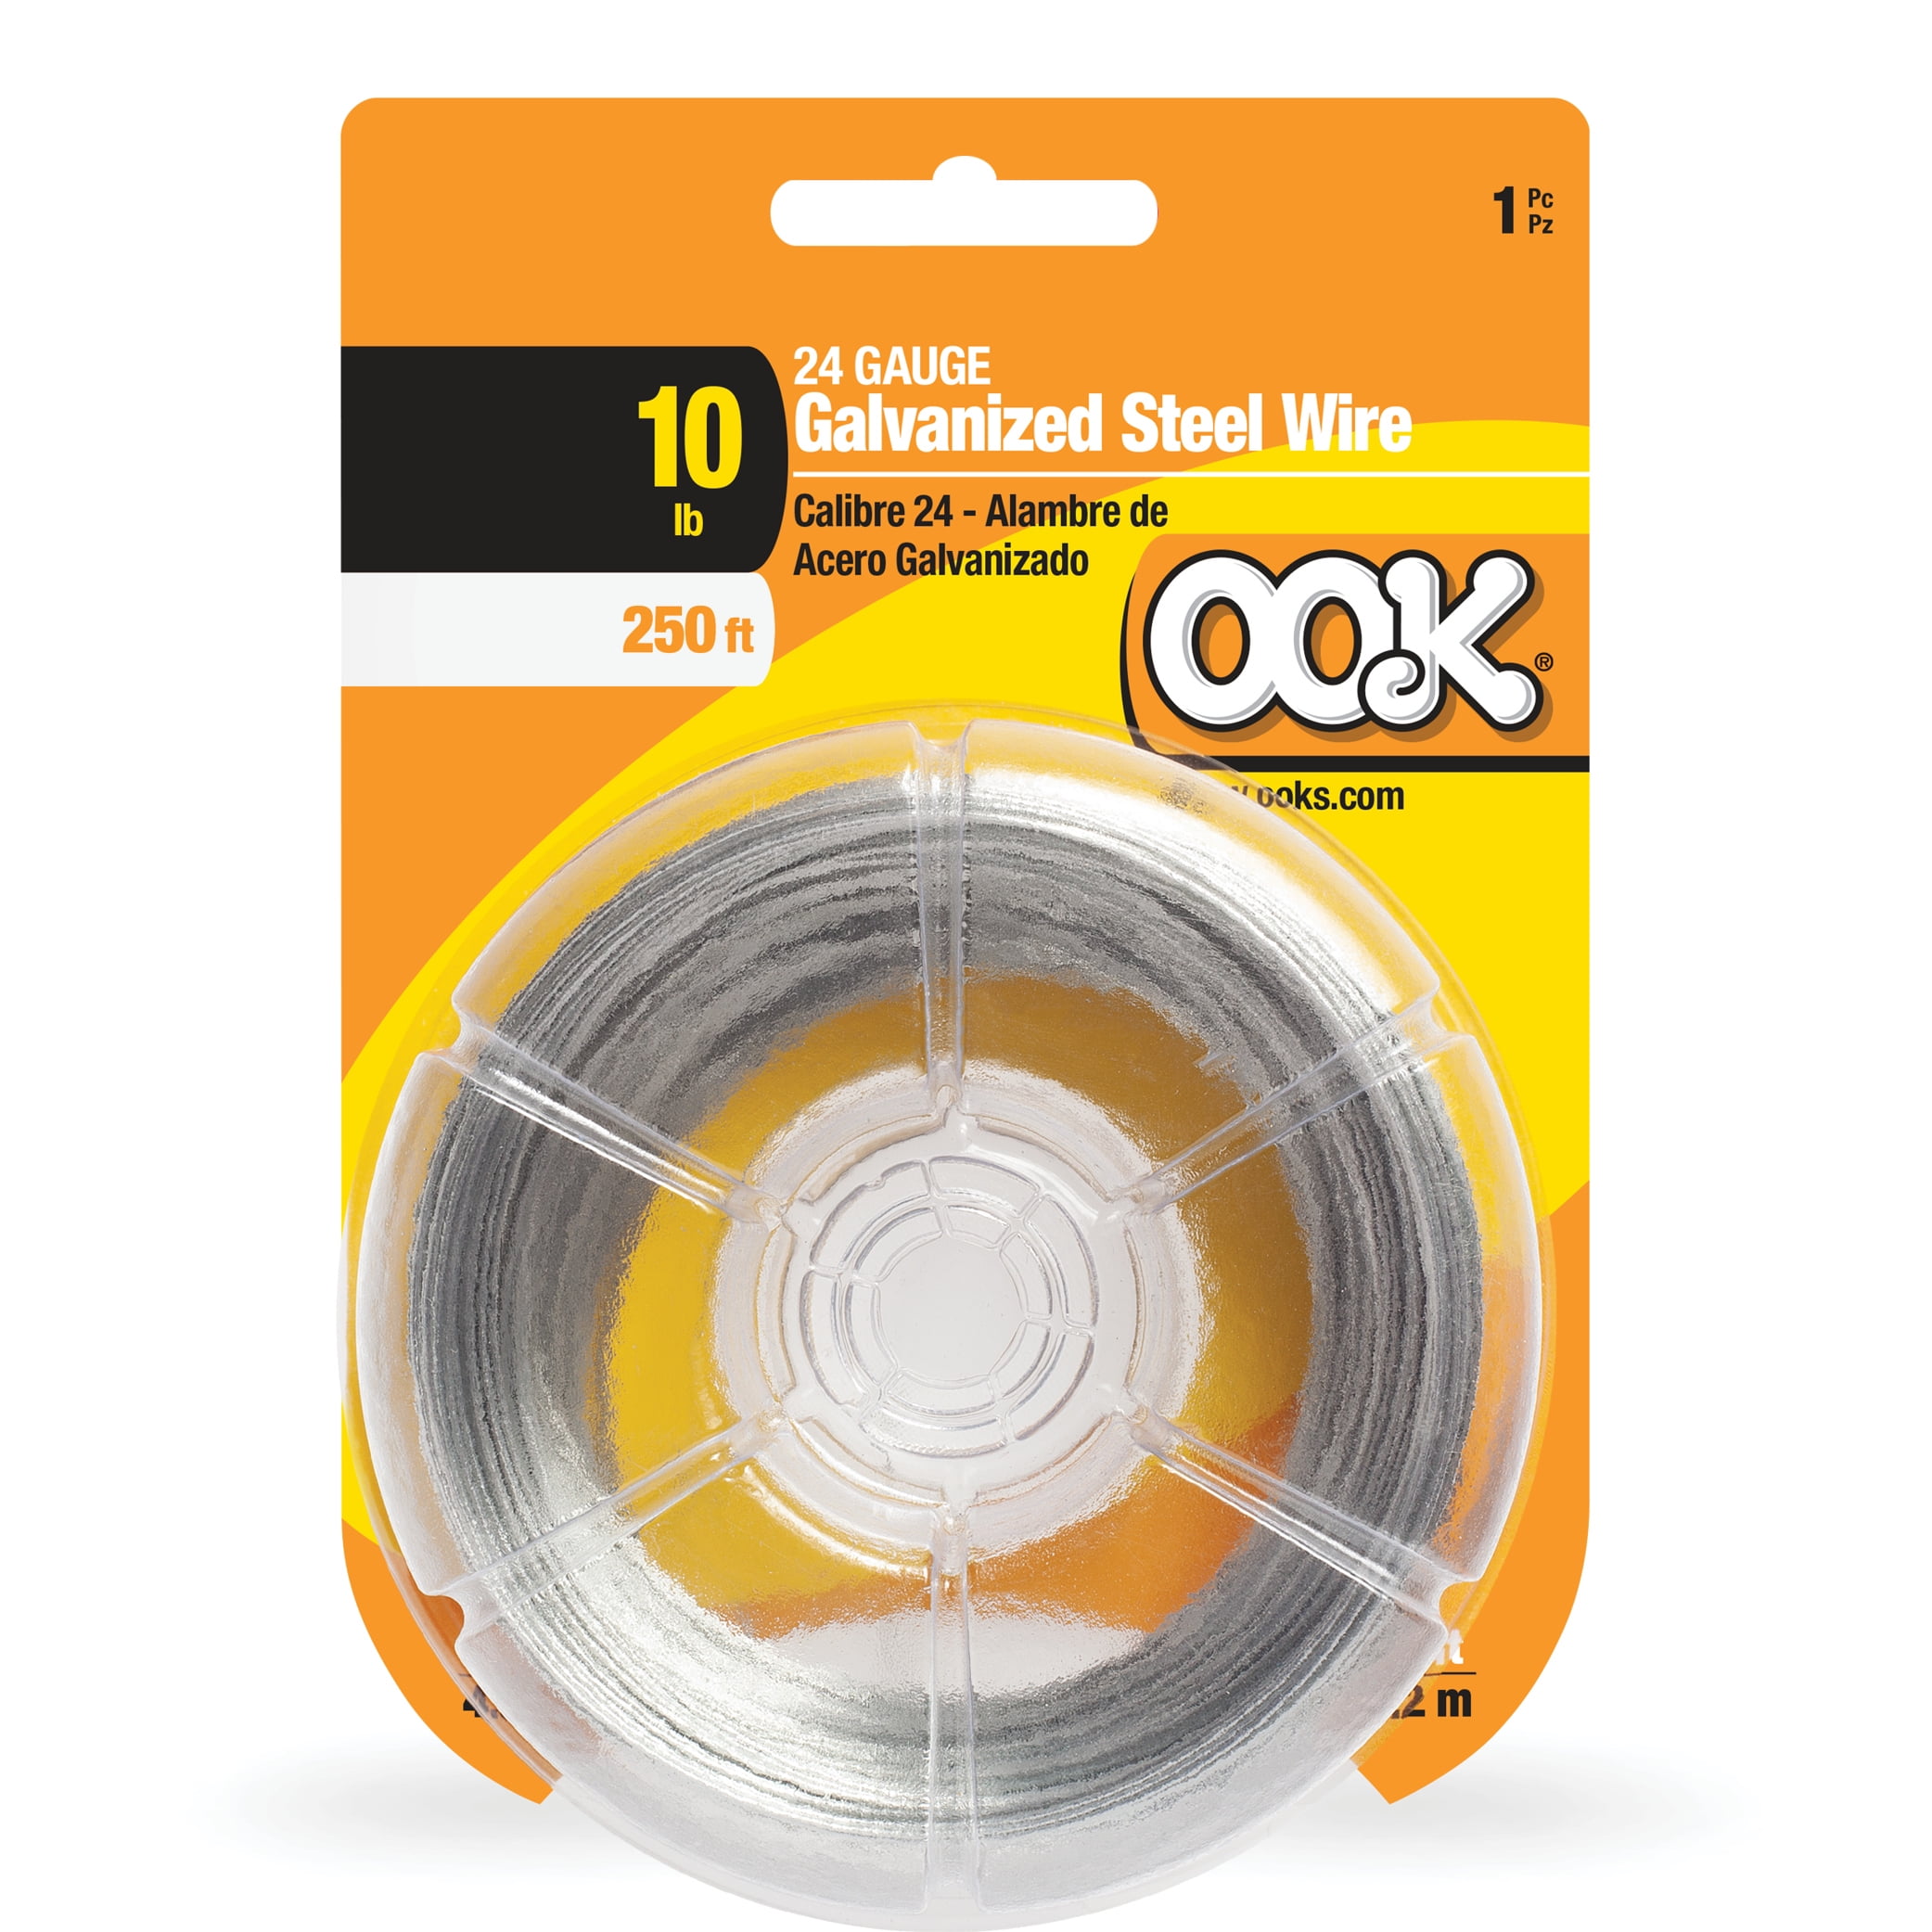 Reviews for OOK 100 ft. 5 lb. 28-Gauge Galvanized Steel Wire